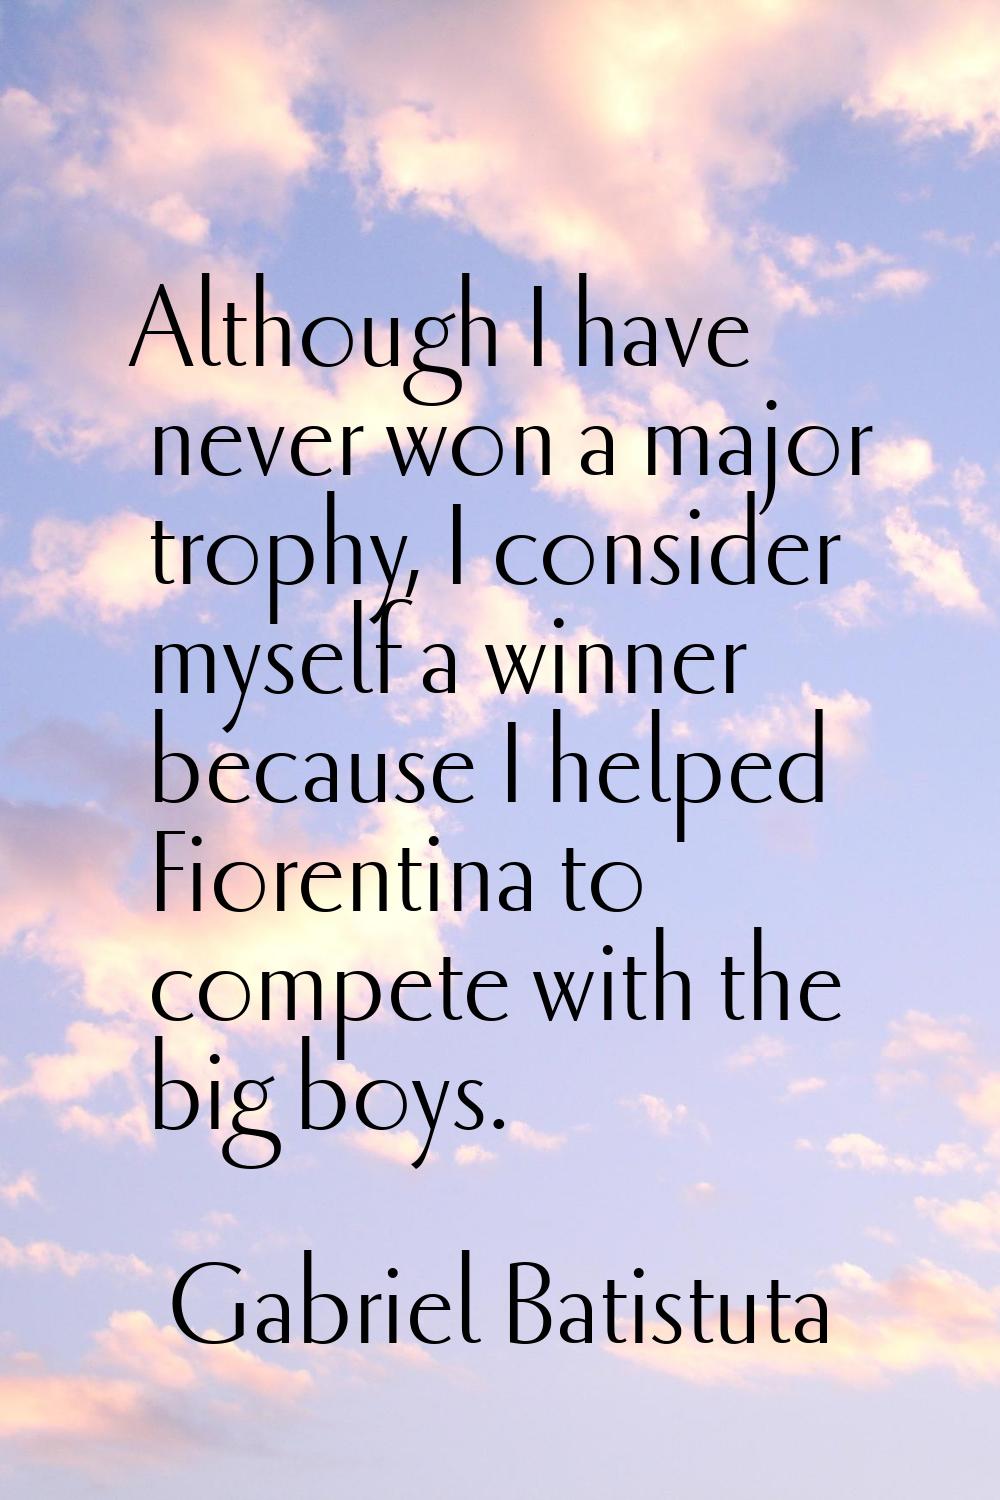 Although I have never won a major trophy, I consider myself a winner because I helped Fiorentina to